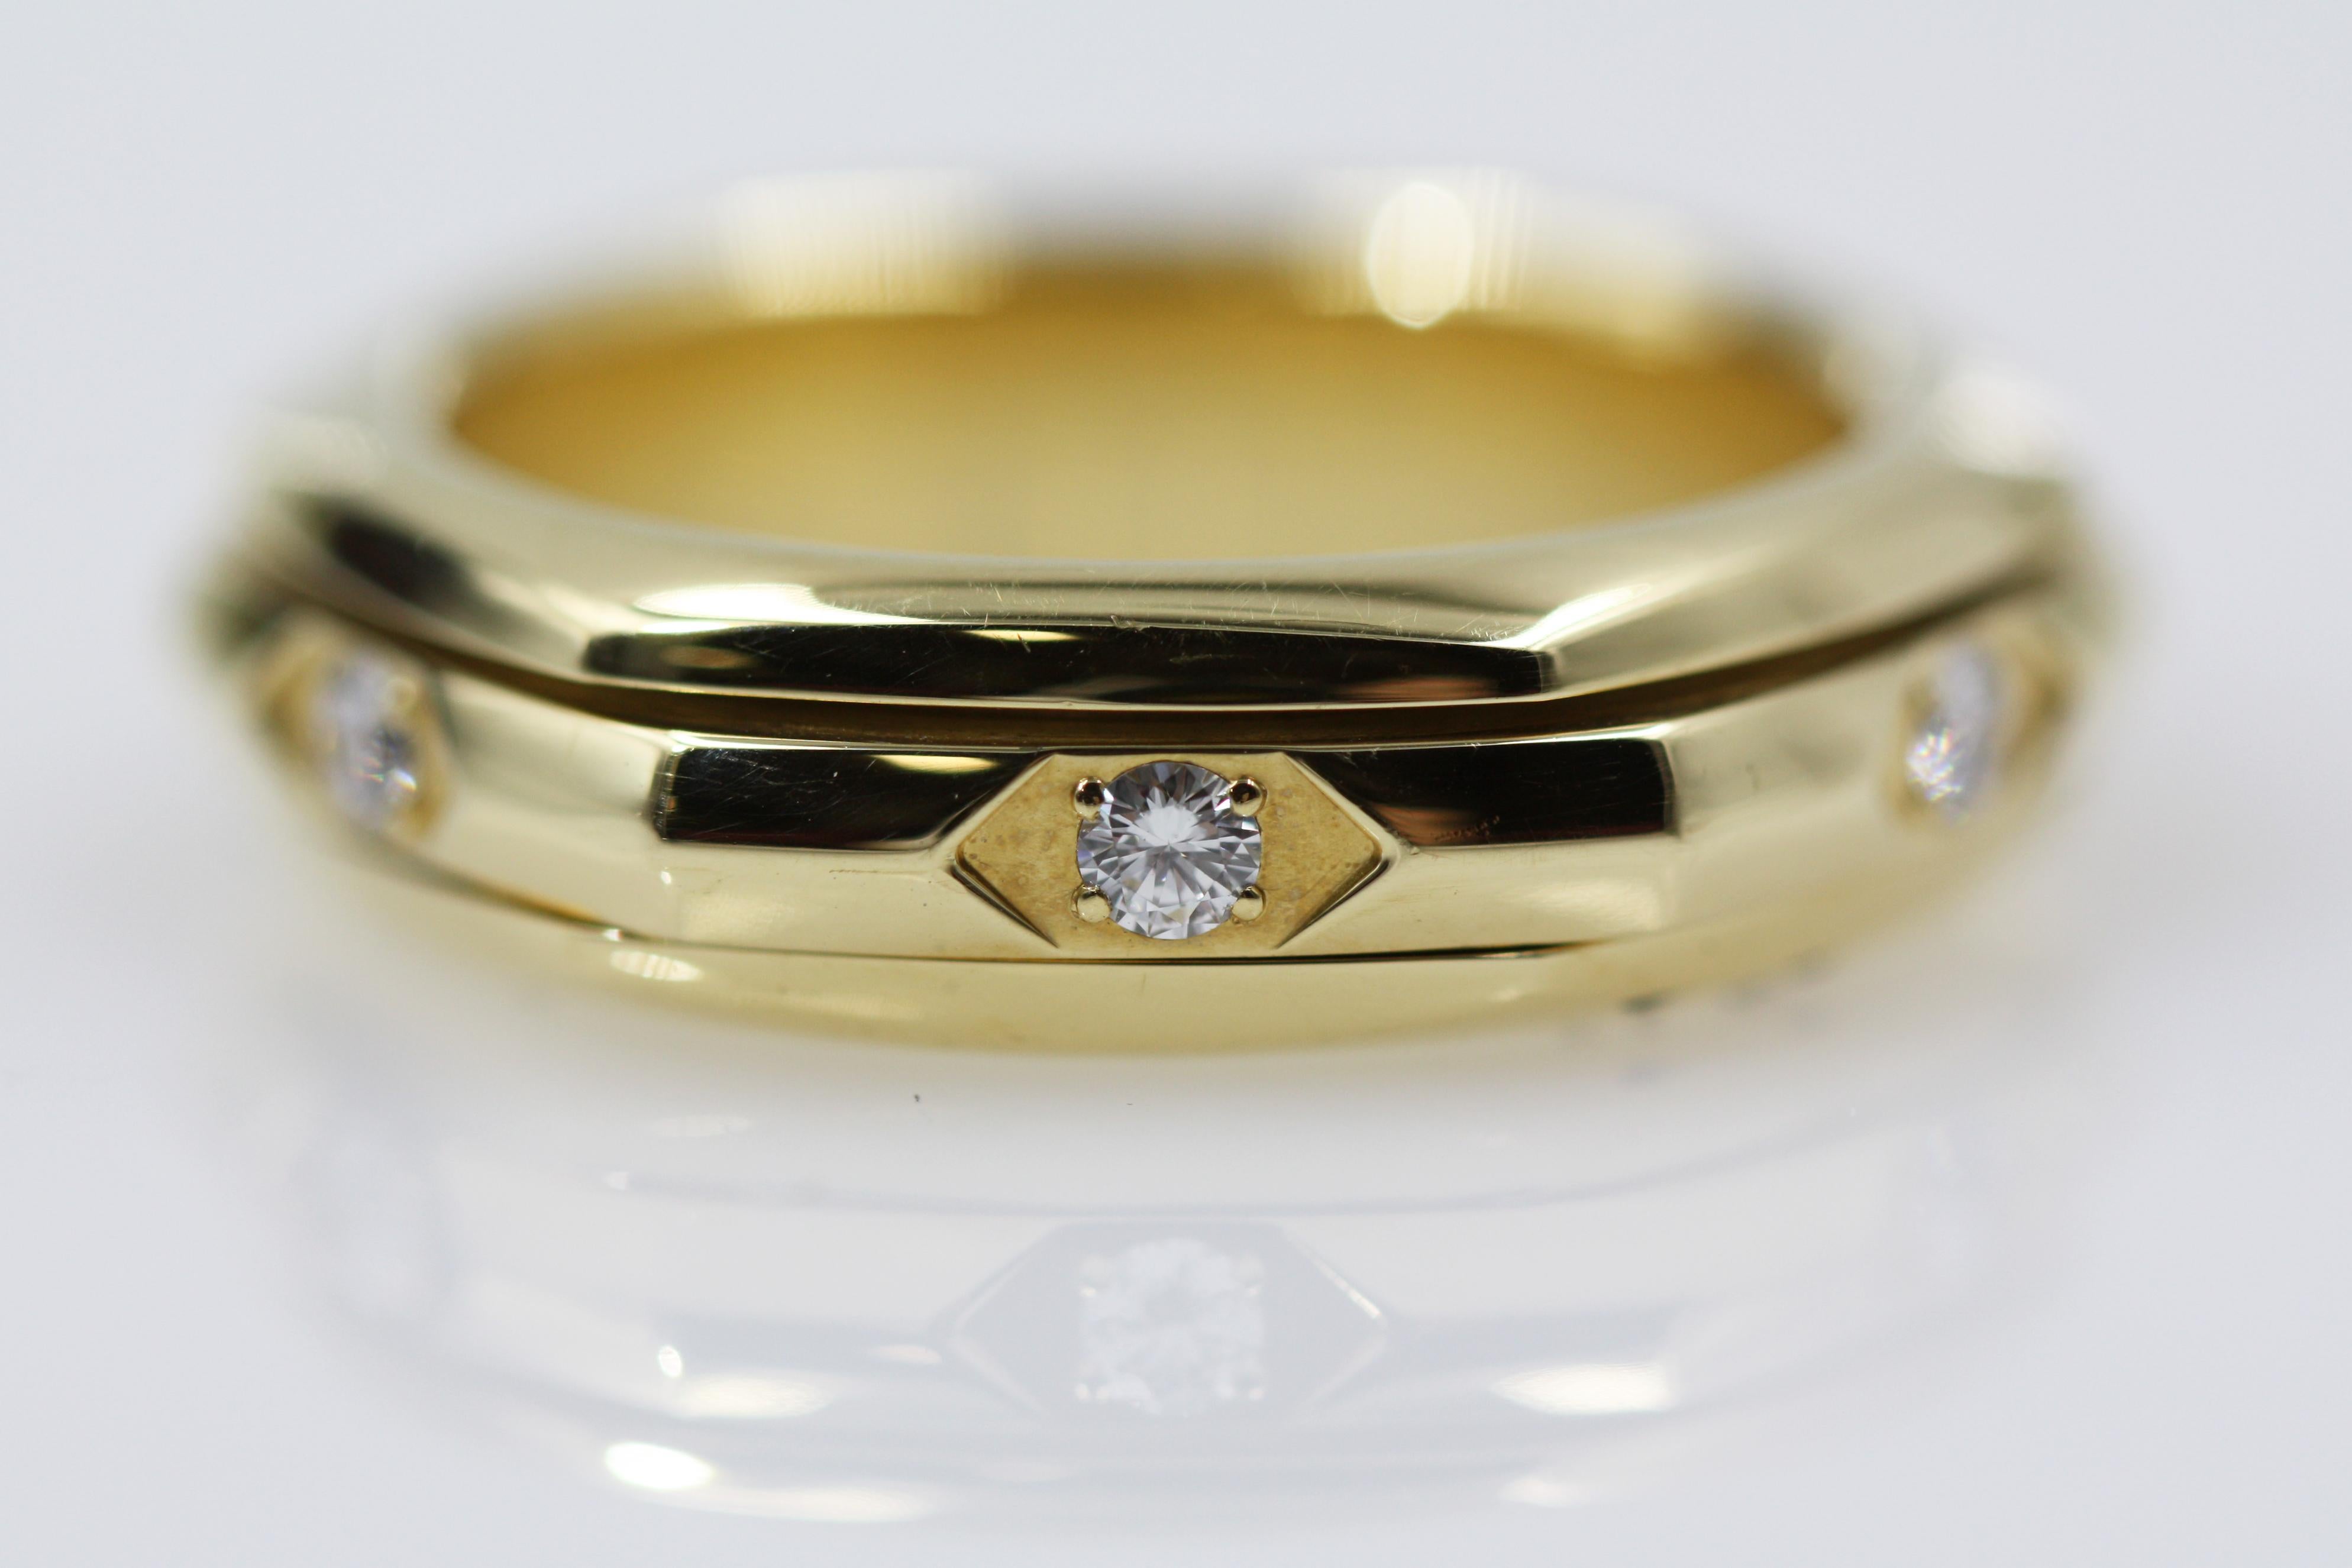 Piaget 18K Yellow Gold Top Wesselton Movable Ring set with 6 Diamonds
Re: G34PE954 
Size EU54 US6.75
Weight: 11.4g
Stock#: PTJ074
This item will come with a box